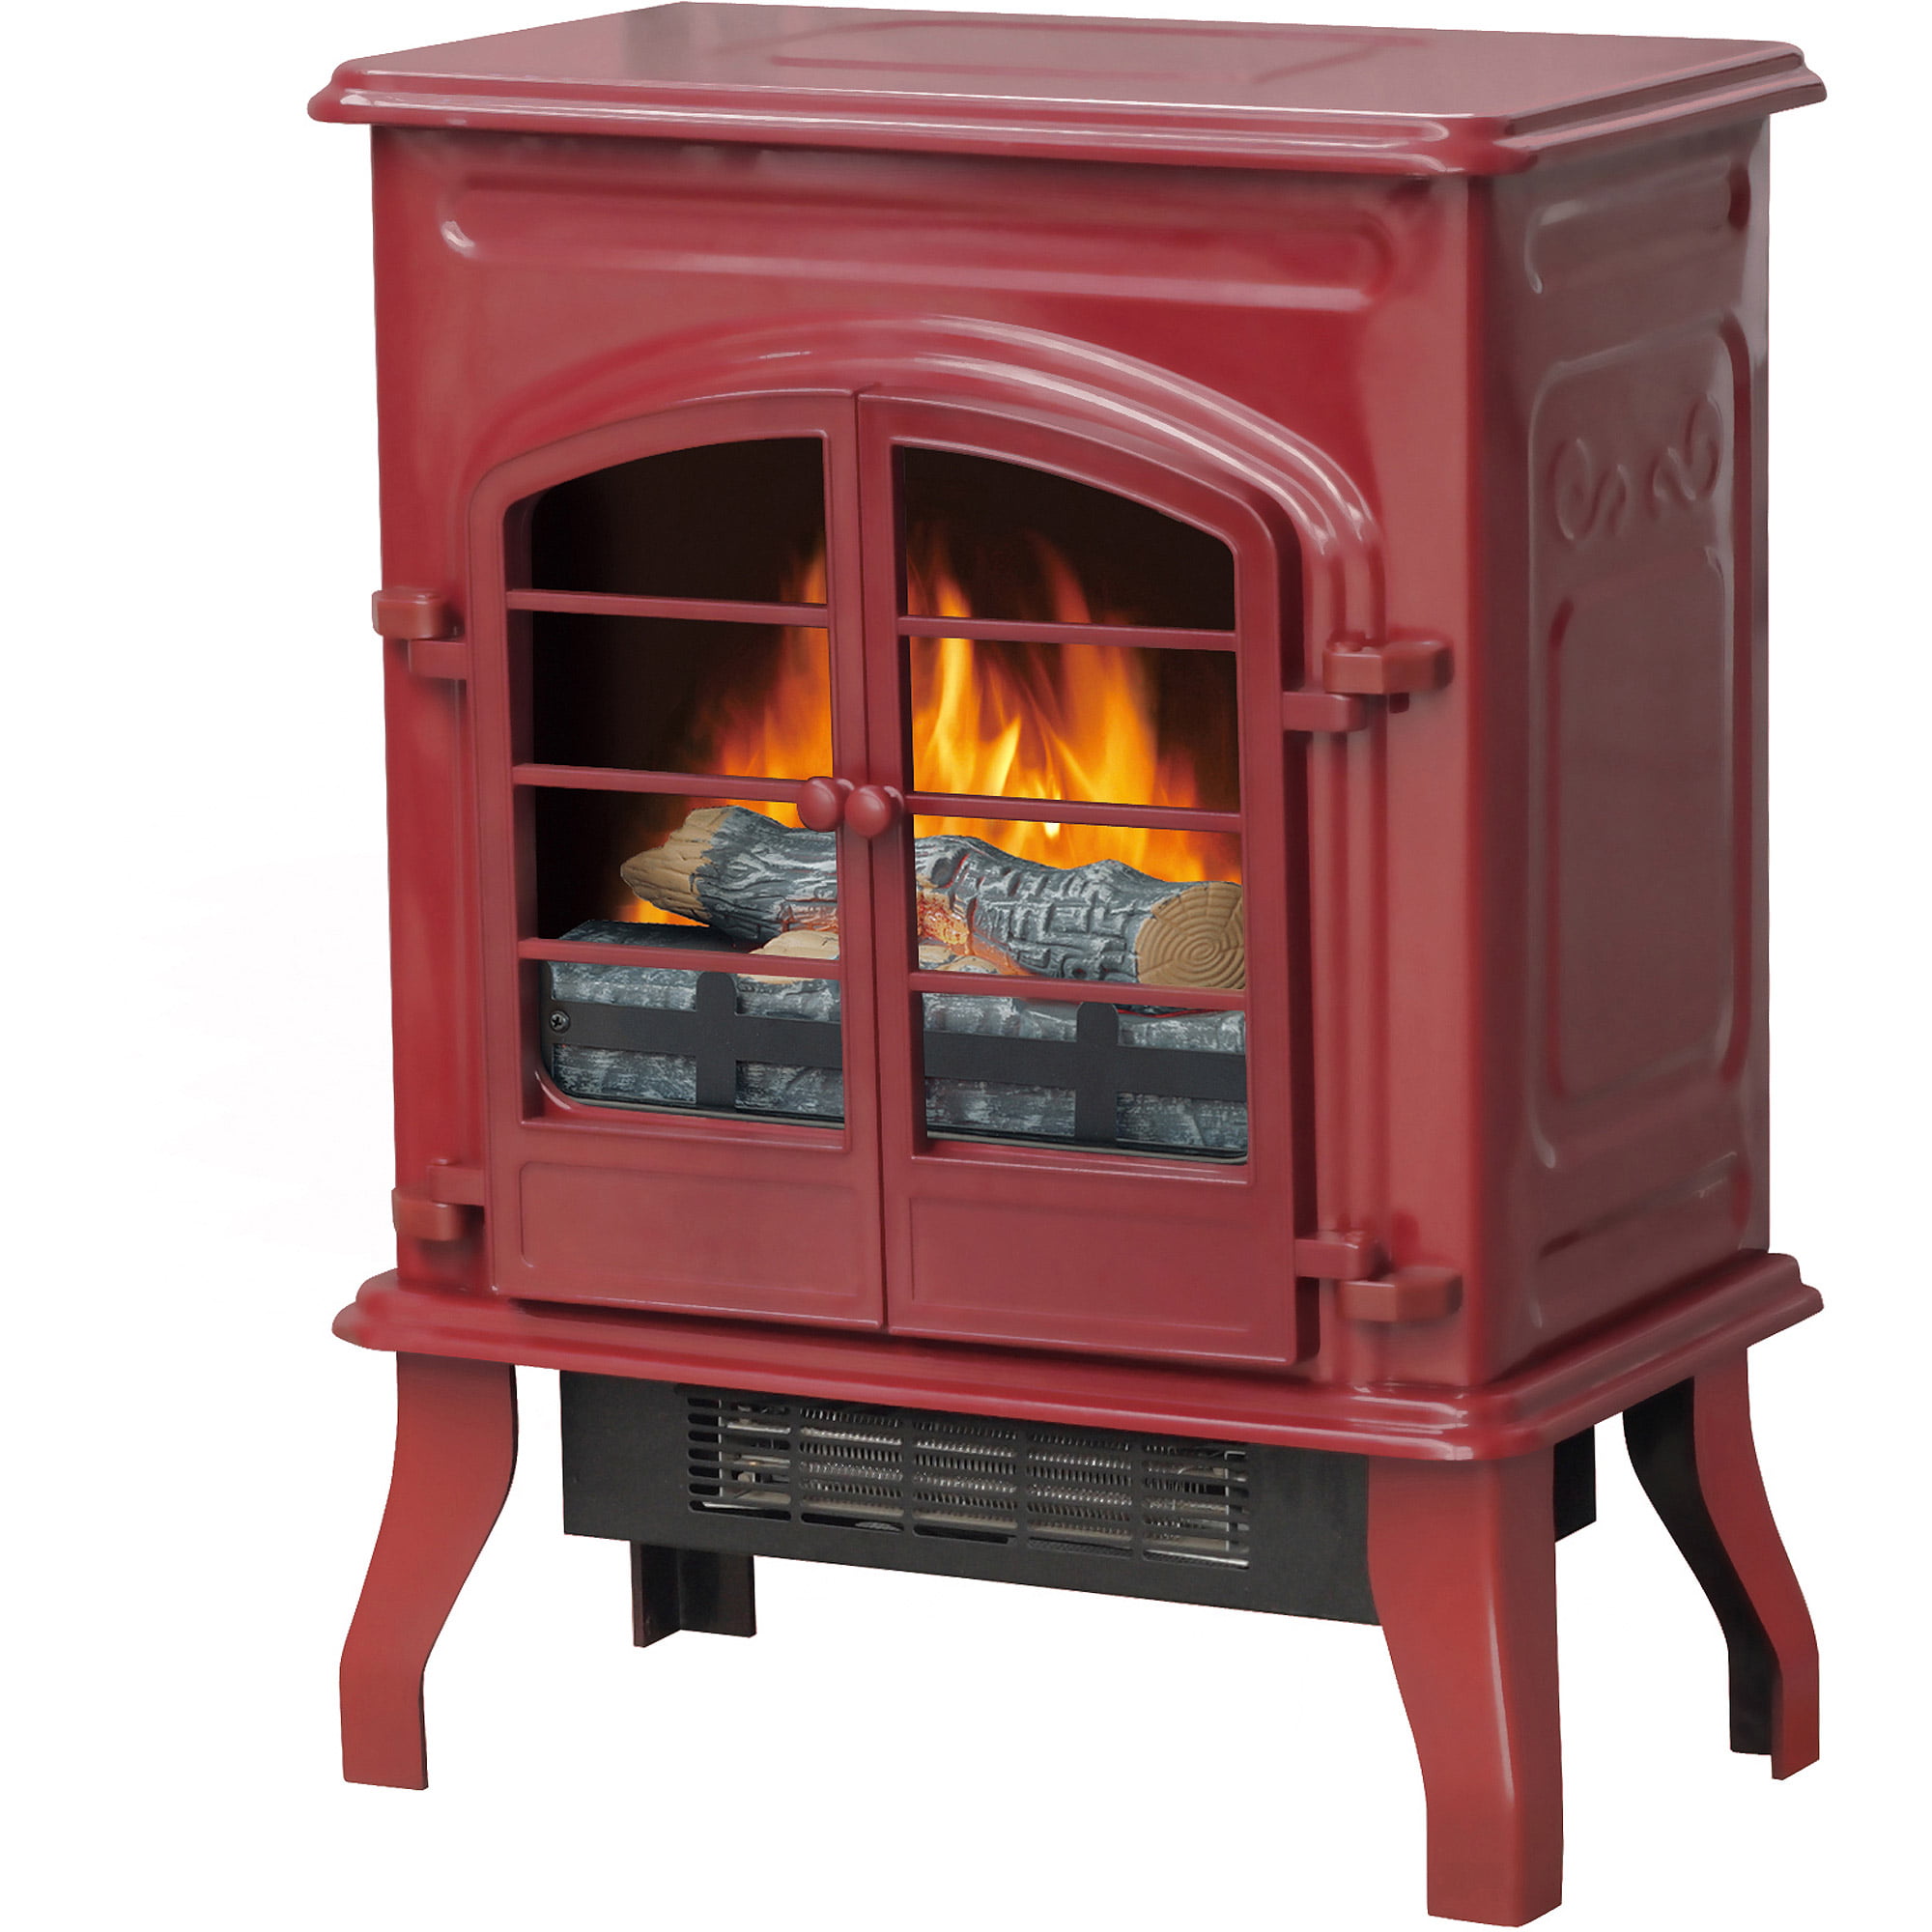 Electric Stove Heater Fireplace Flame Portable Standing Fire Free 1500w Portable Add a charming touch to your home with this Electric Stove Heater. It features a realistic flame effect and you can operate it with heat for warming up to 325 sq ft